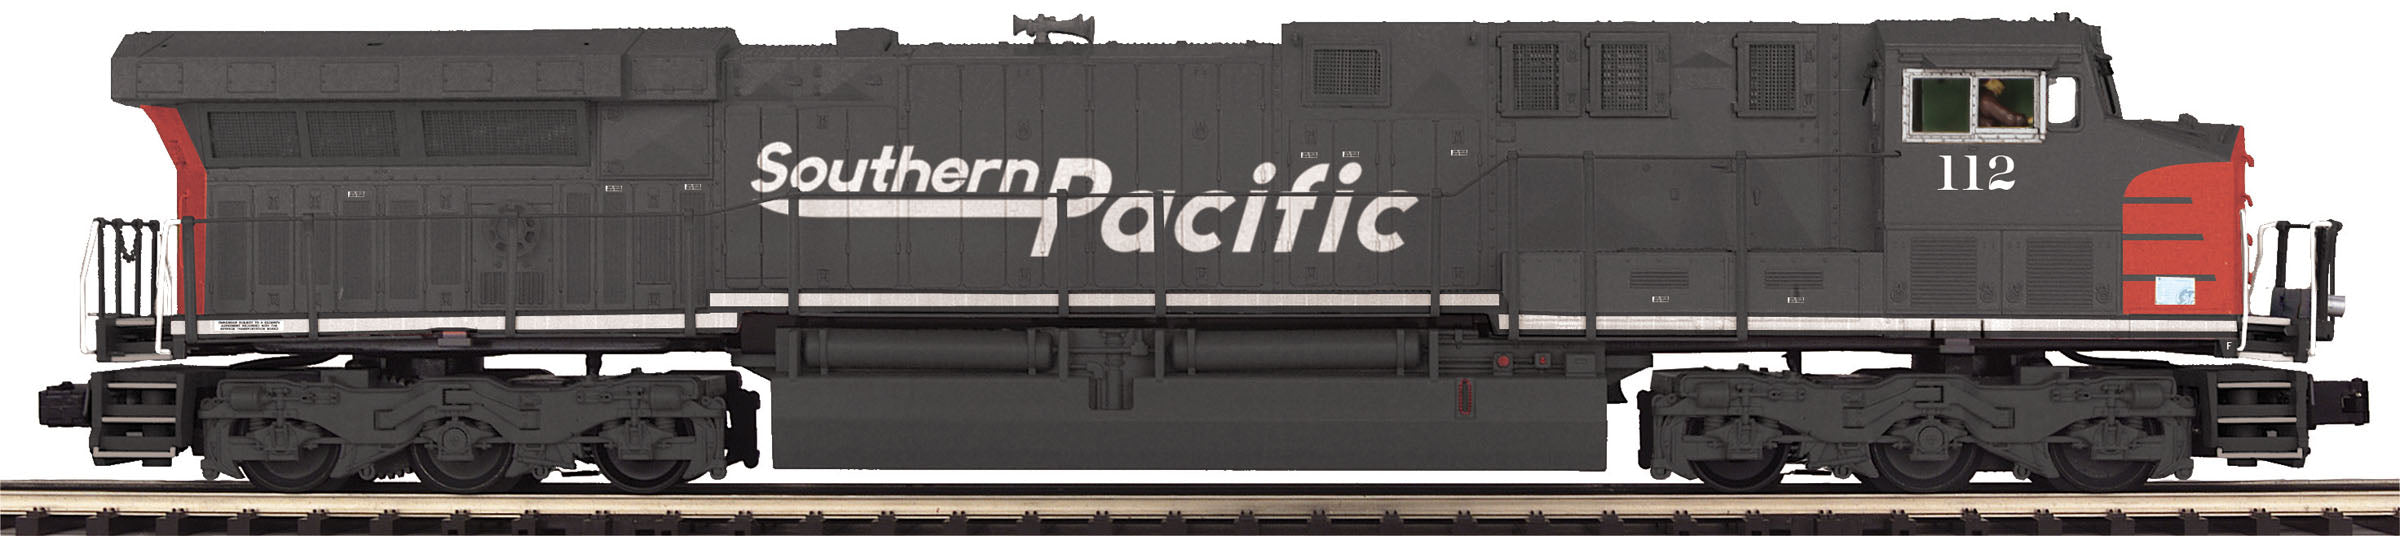 MTH 20-2187SP2-1 - AC6000 Diesel Engine "Southern Pacific" #144 w/ PS3 - Custom Run for MrMuffin'sTrains